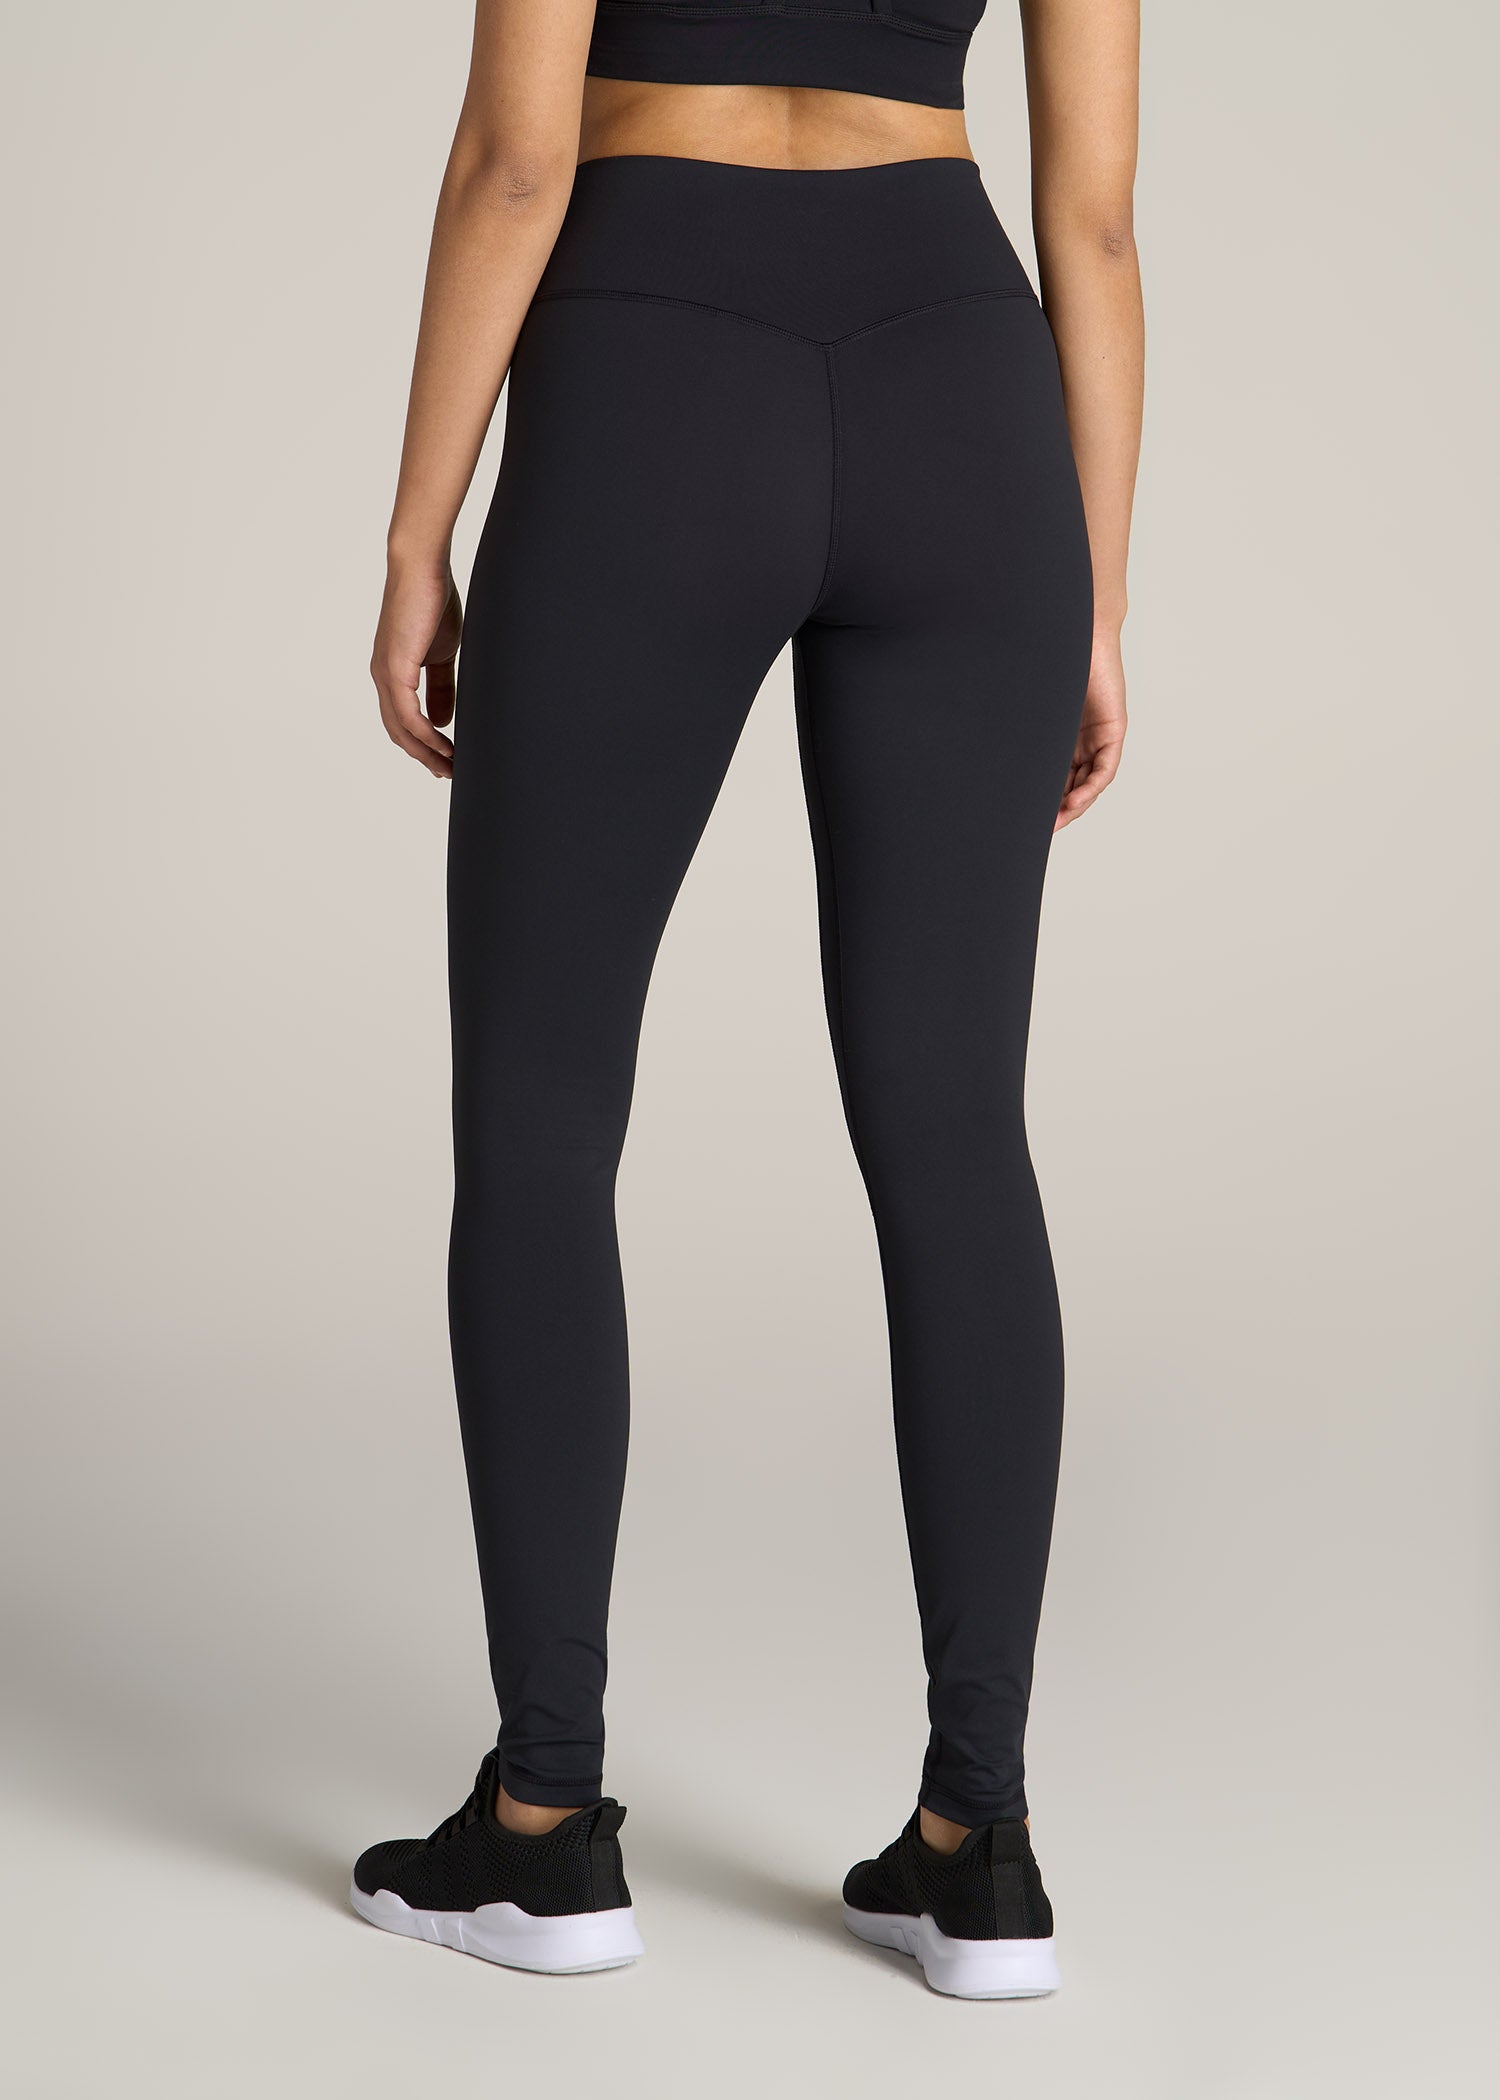 EXTRA STRETCH HIGH RISE LEGGINGS PANTS (TALL)